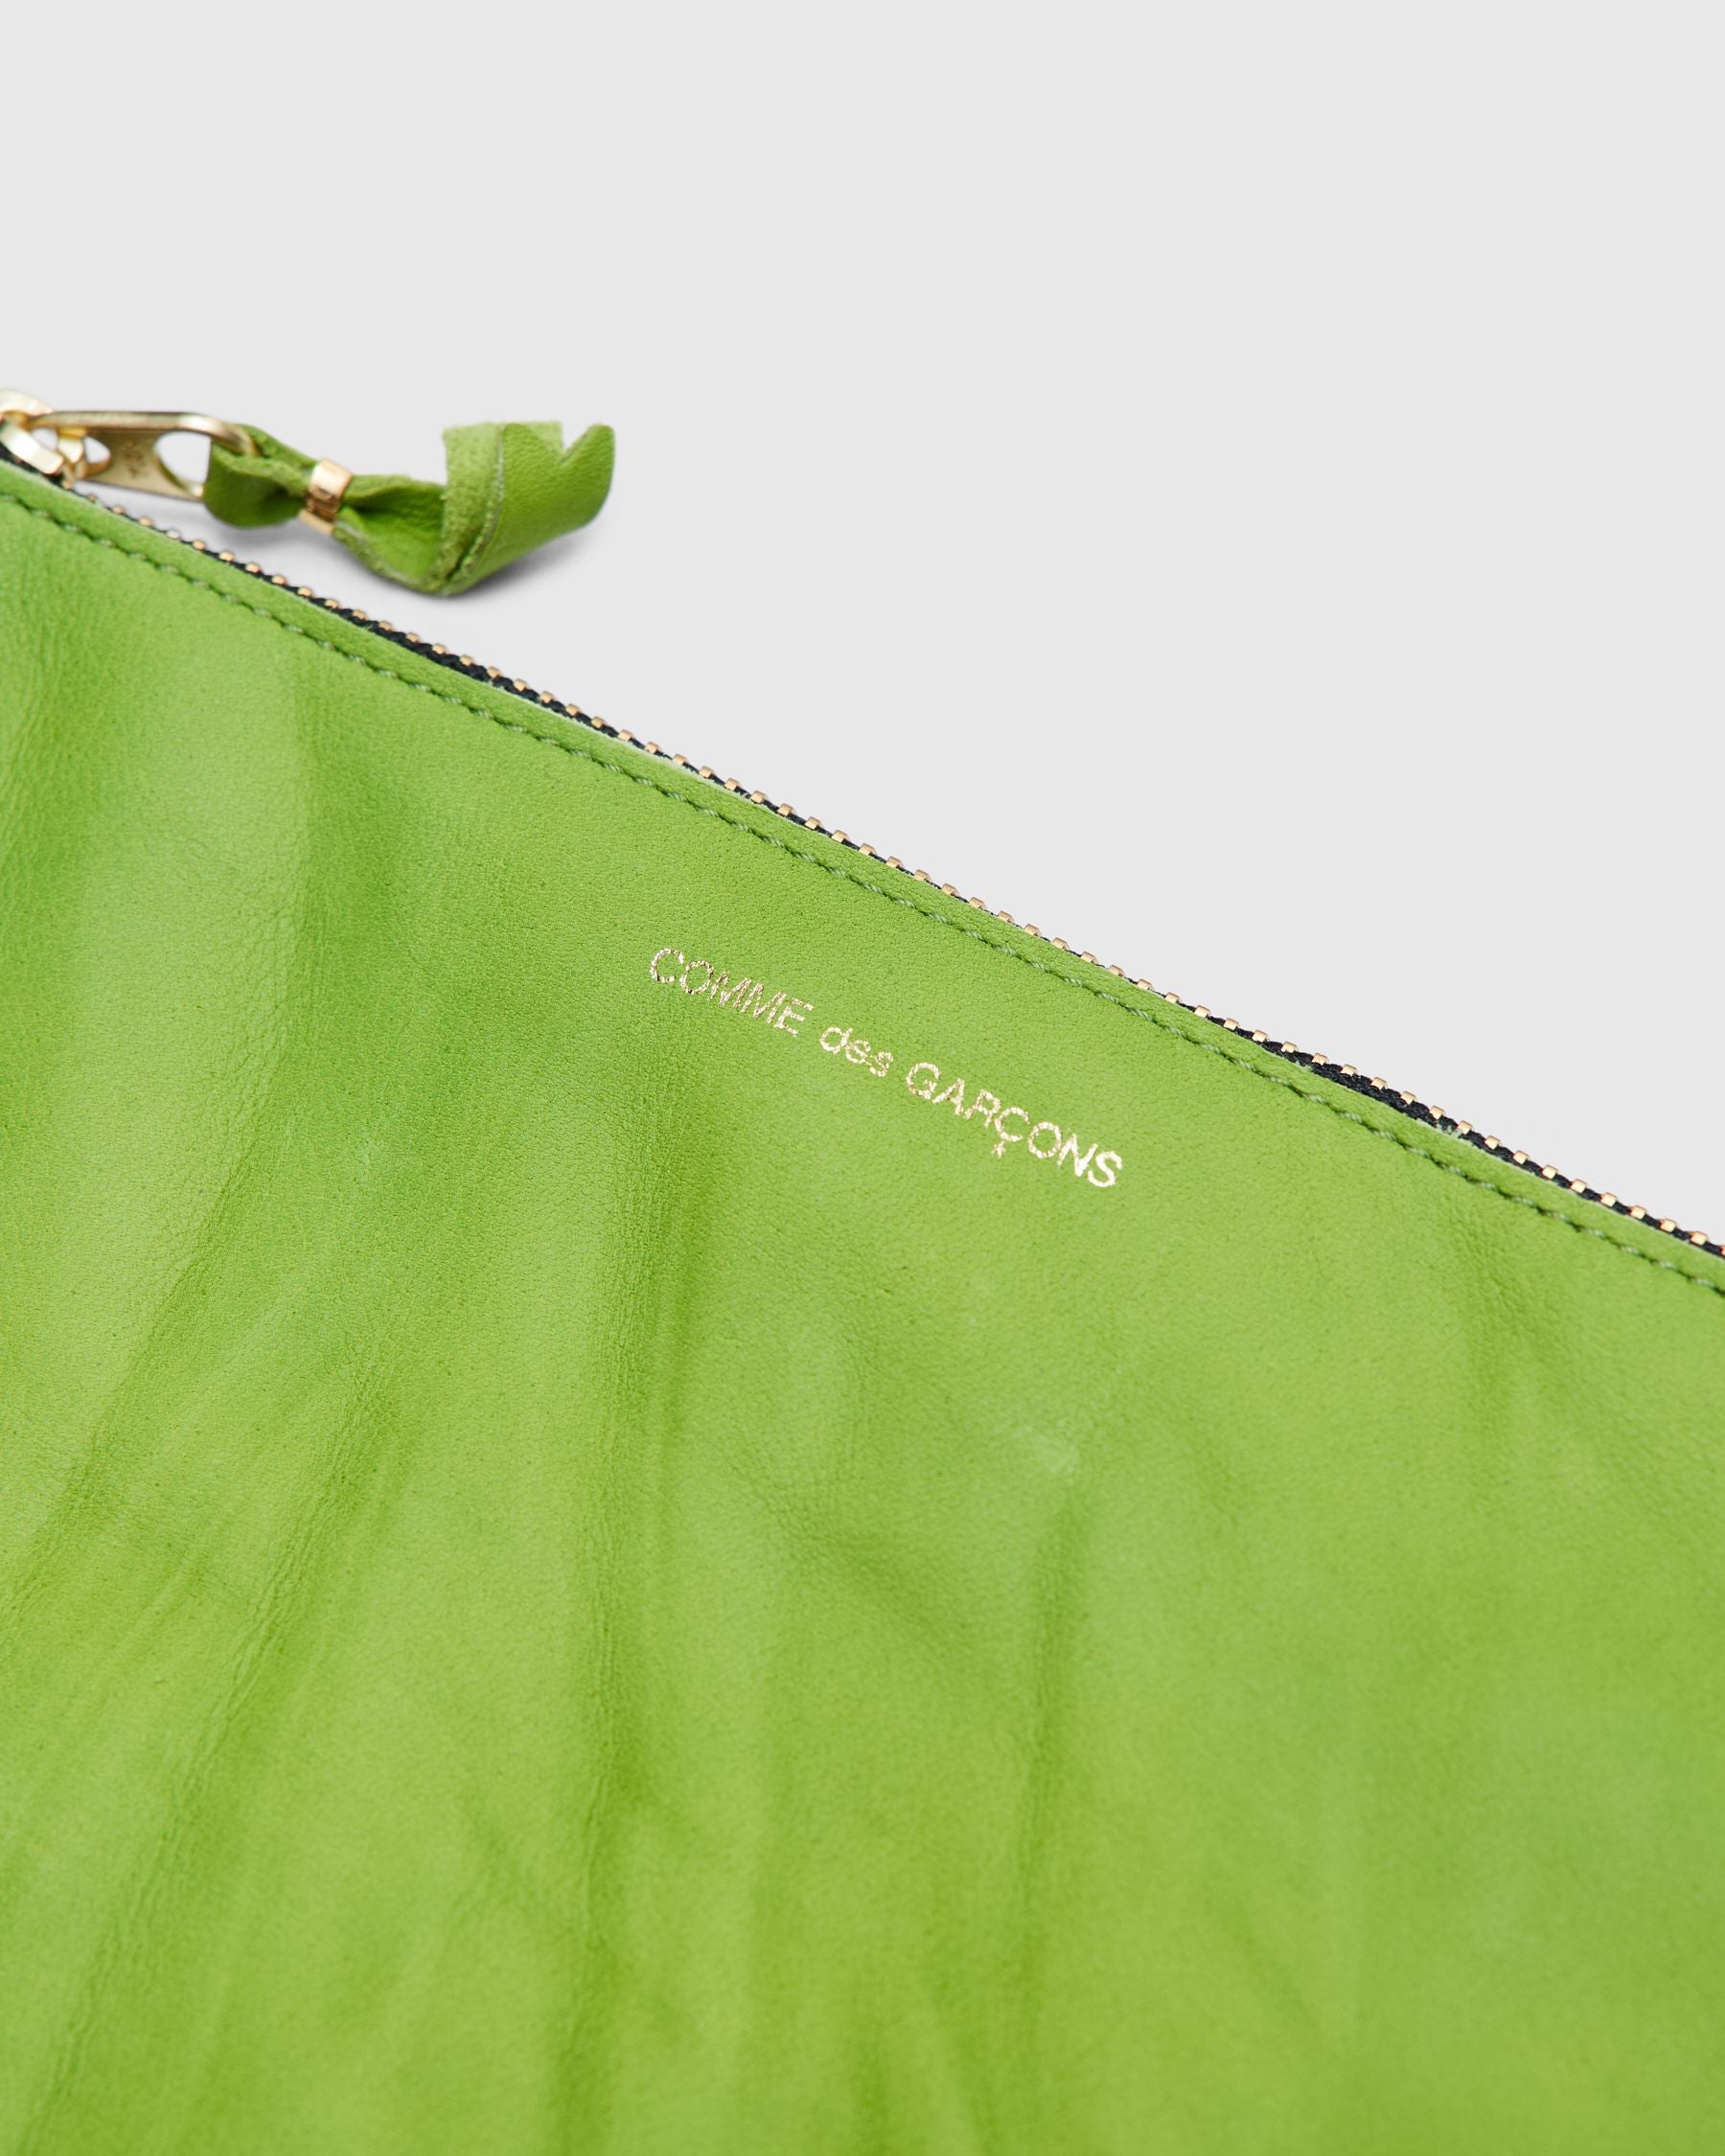 Washed Zip Pouch in Green